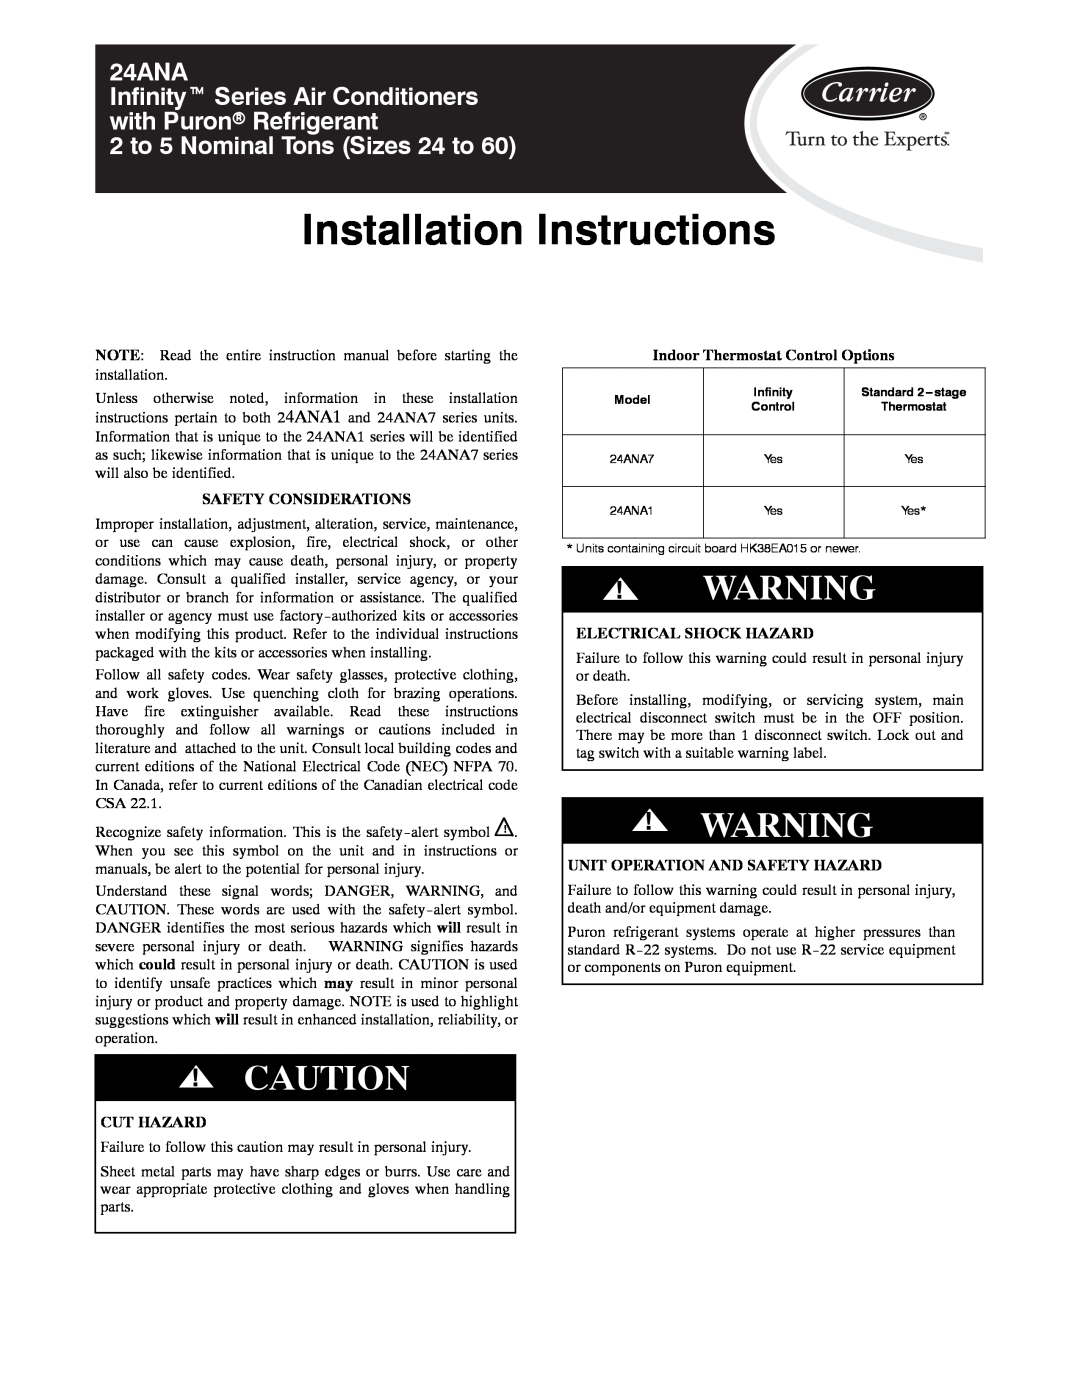 Carrier 24ANA installation instructions Safety Considerations, Indoor Thermostat Control Options, Electrical Shock Hazard 